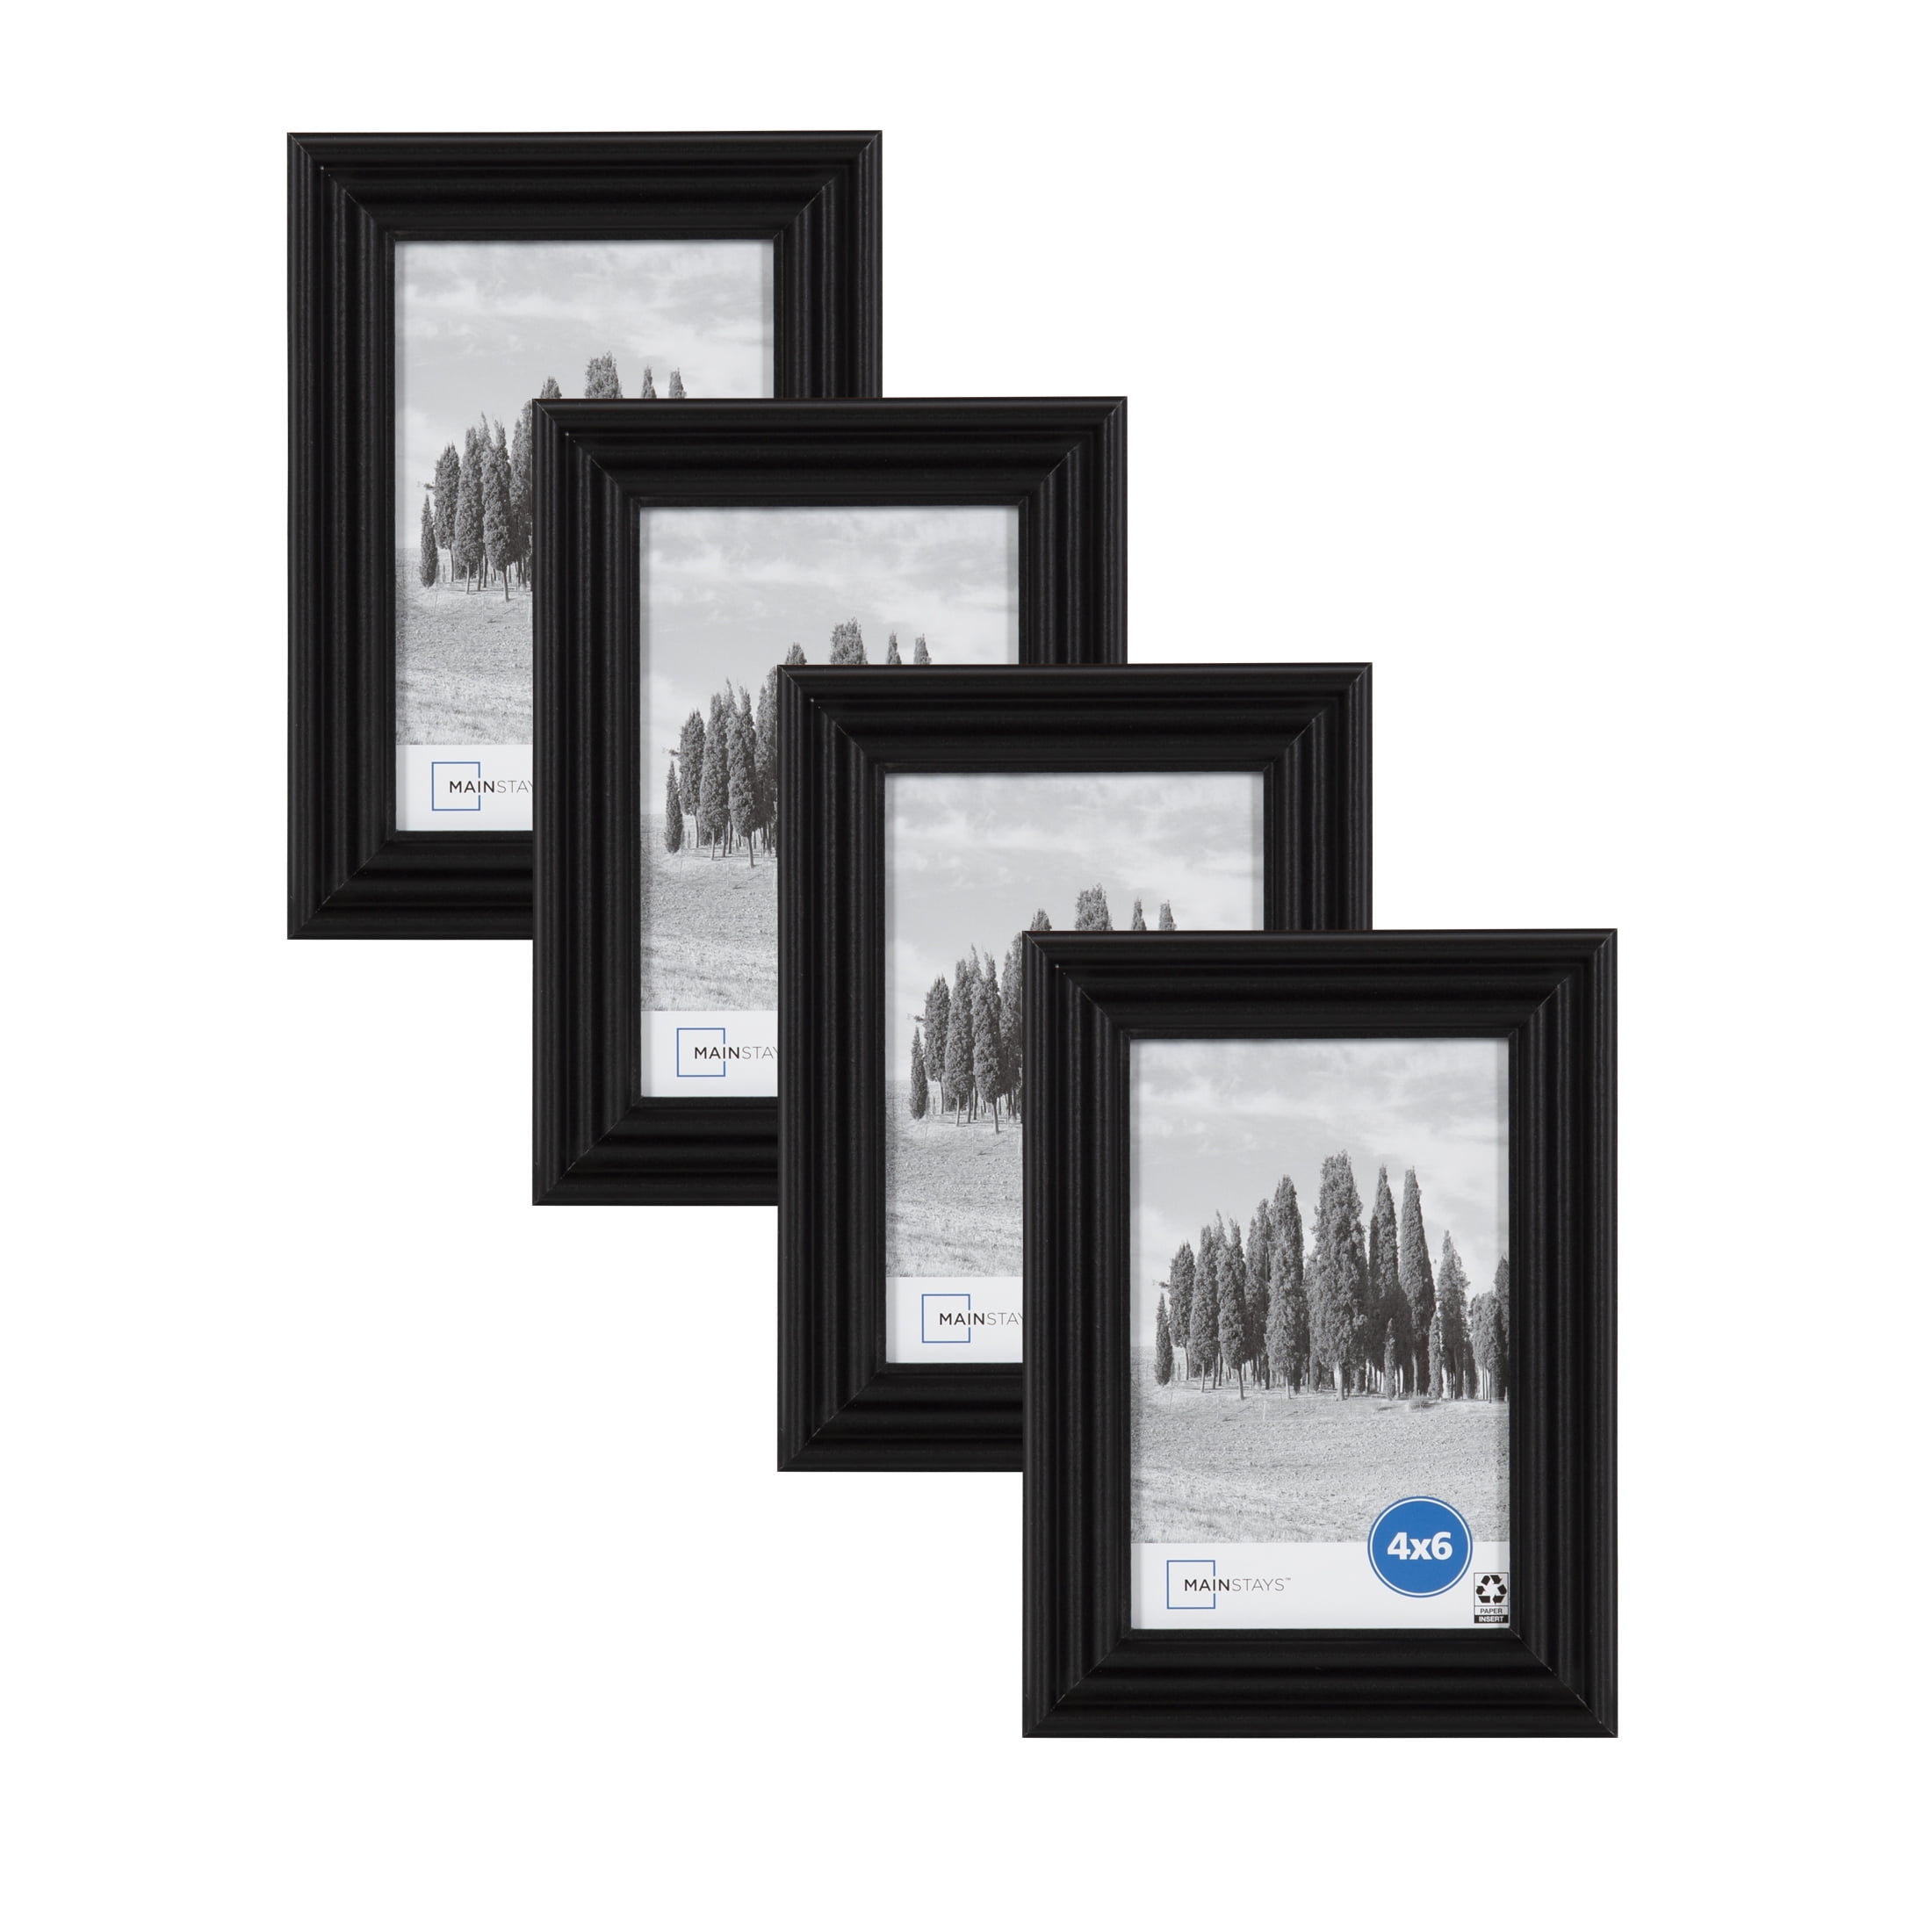  4x6 Picture Frame Set of 5, Wood Photo Frames for 4x6 Pictures  Wall Gallery Black 4x6 Frames Tabletop or Wall Mount Display for Prints,  Photos, Paintings, Landscape and Kids Artwork (